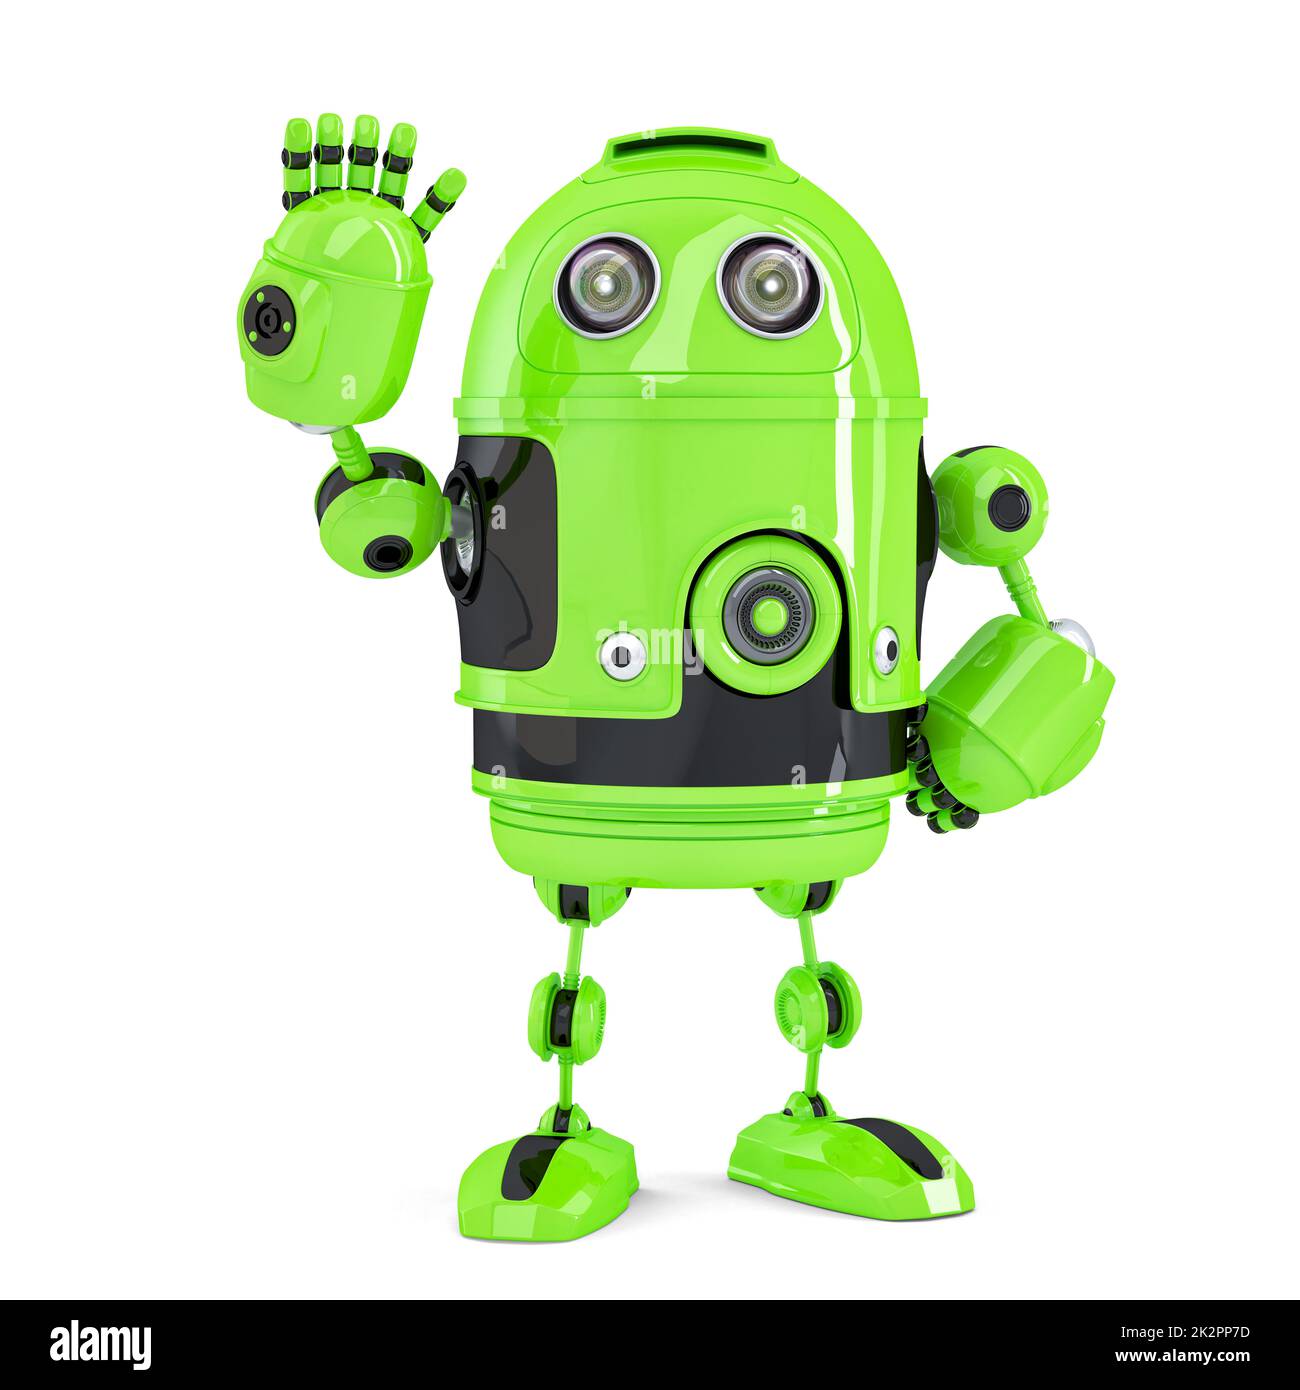 Green 3d Robot waving hello. Isolated. Contains clipping path Stock Photo